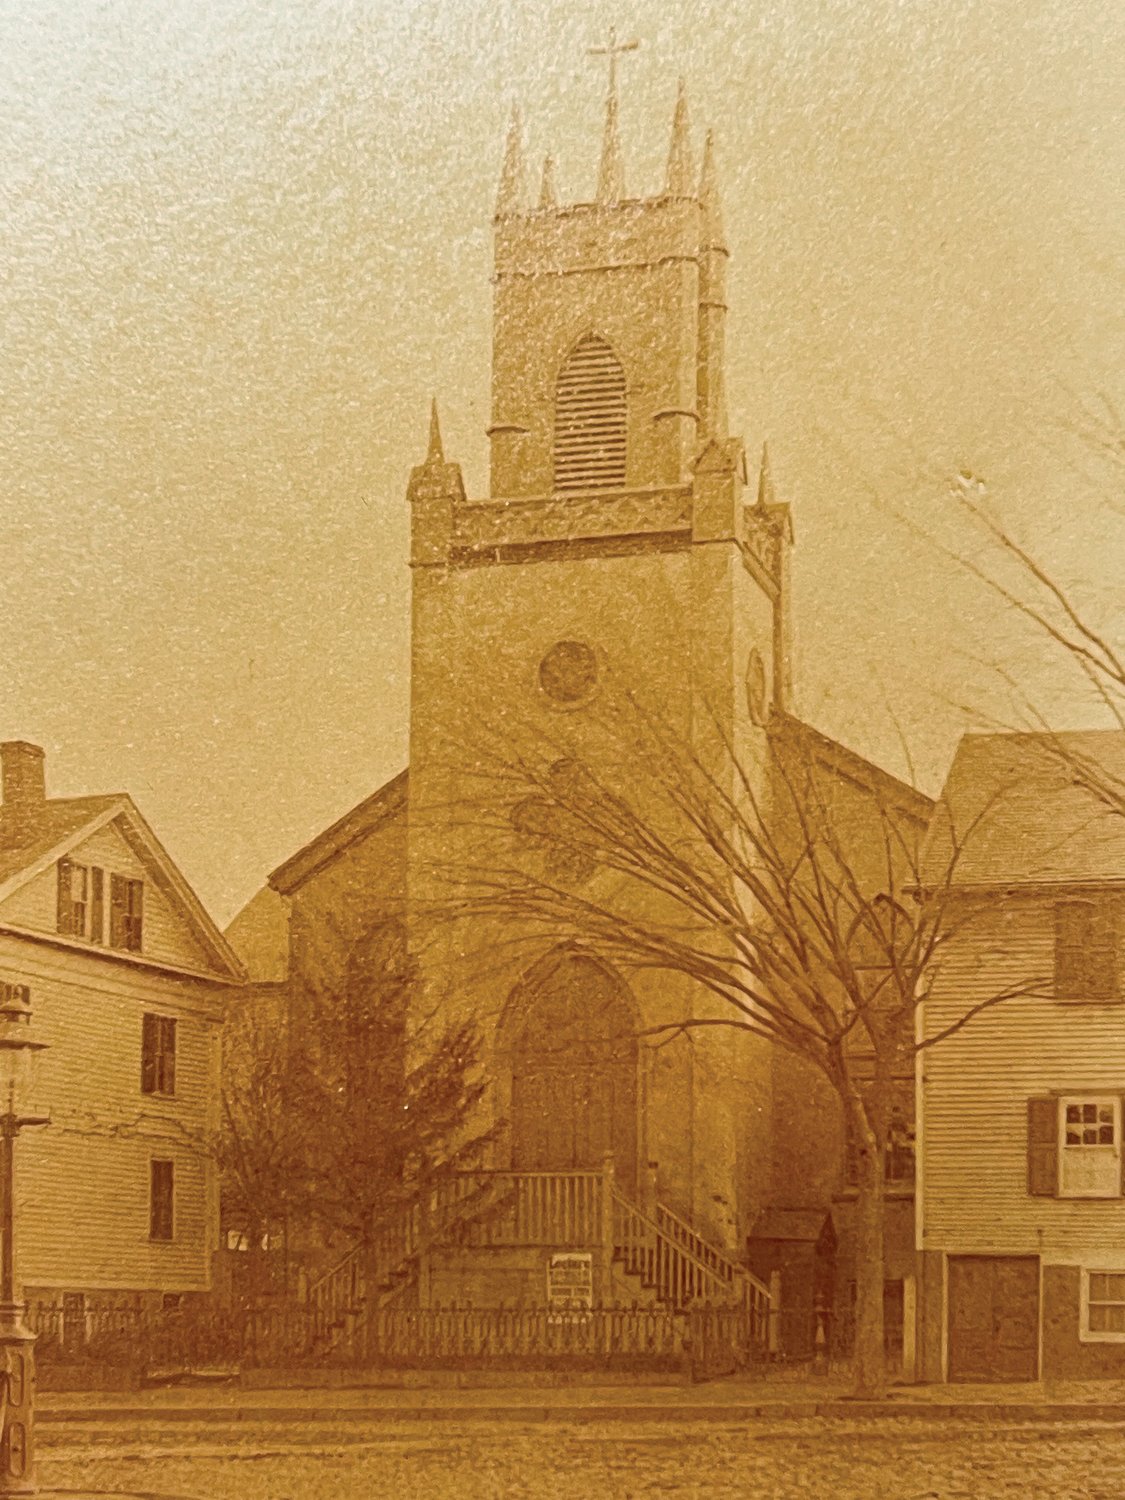 A rare view of the original Church of SS. Peter and Paul, one of the early stone churches built in Providence, where Mass was first celebrated on March 10, 1837. The cornerstone was laid on the site 41 years later, on Nov. 28, 1878, for the current Cathedral of SS. Peter and Paul.